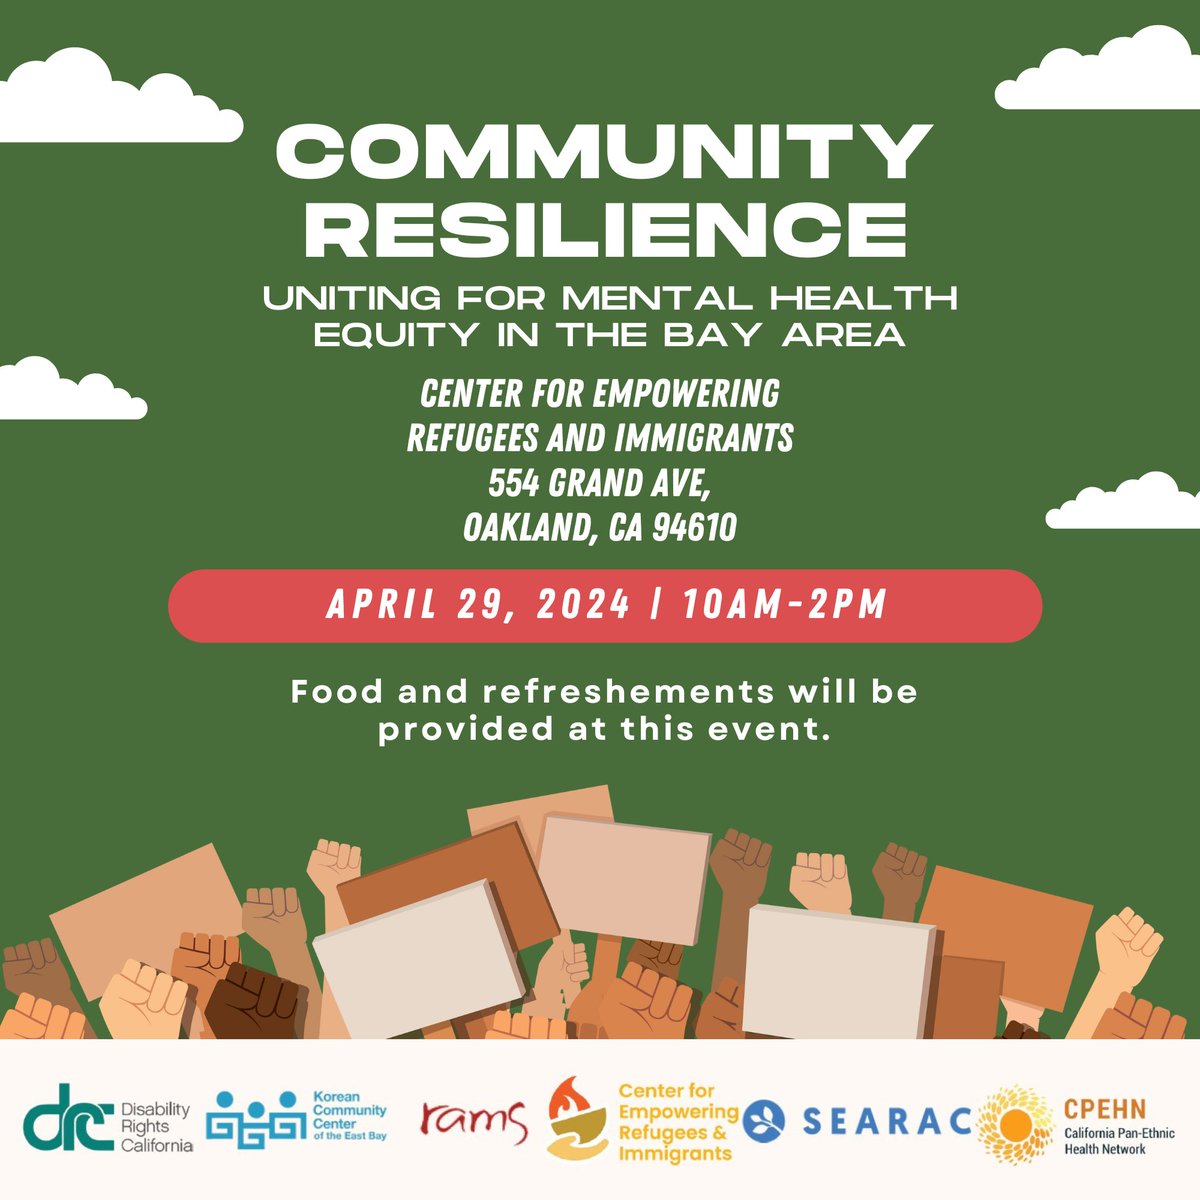 Please join the Korean Cultural Center of the East Bay (@KCCEB), Southeast Asian Resource Action Center (@SEARAC), Center for Empowering Refugees and Immigrants (@CERIeastbay), Interfaith Movement for Human Integrity, @RAMSInc., Disability Rights California (DRC), and the